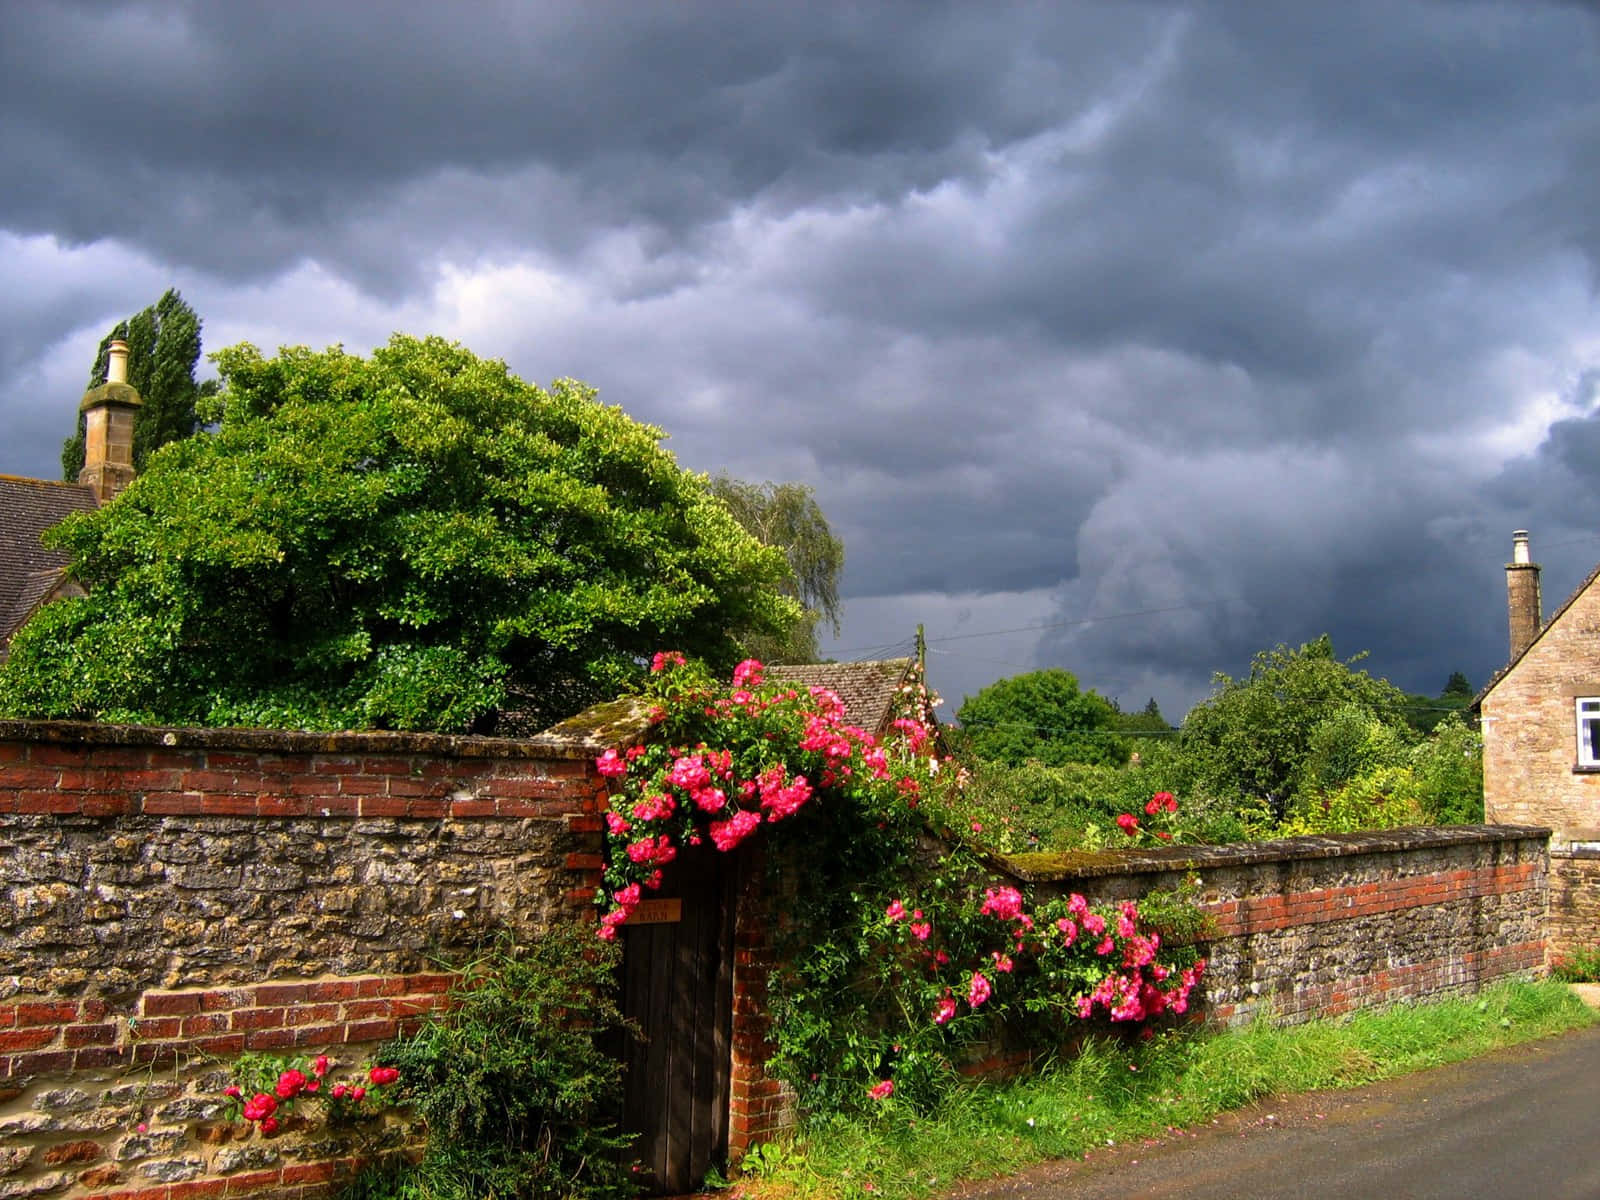 Stormy Skies Over English Countryside Wallpaper